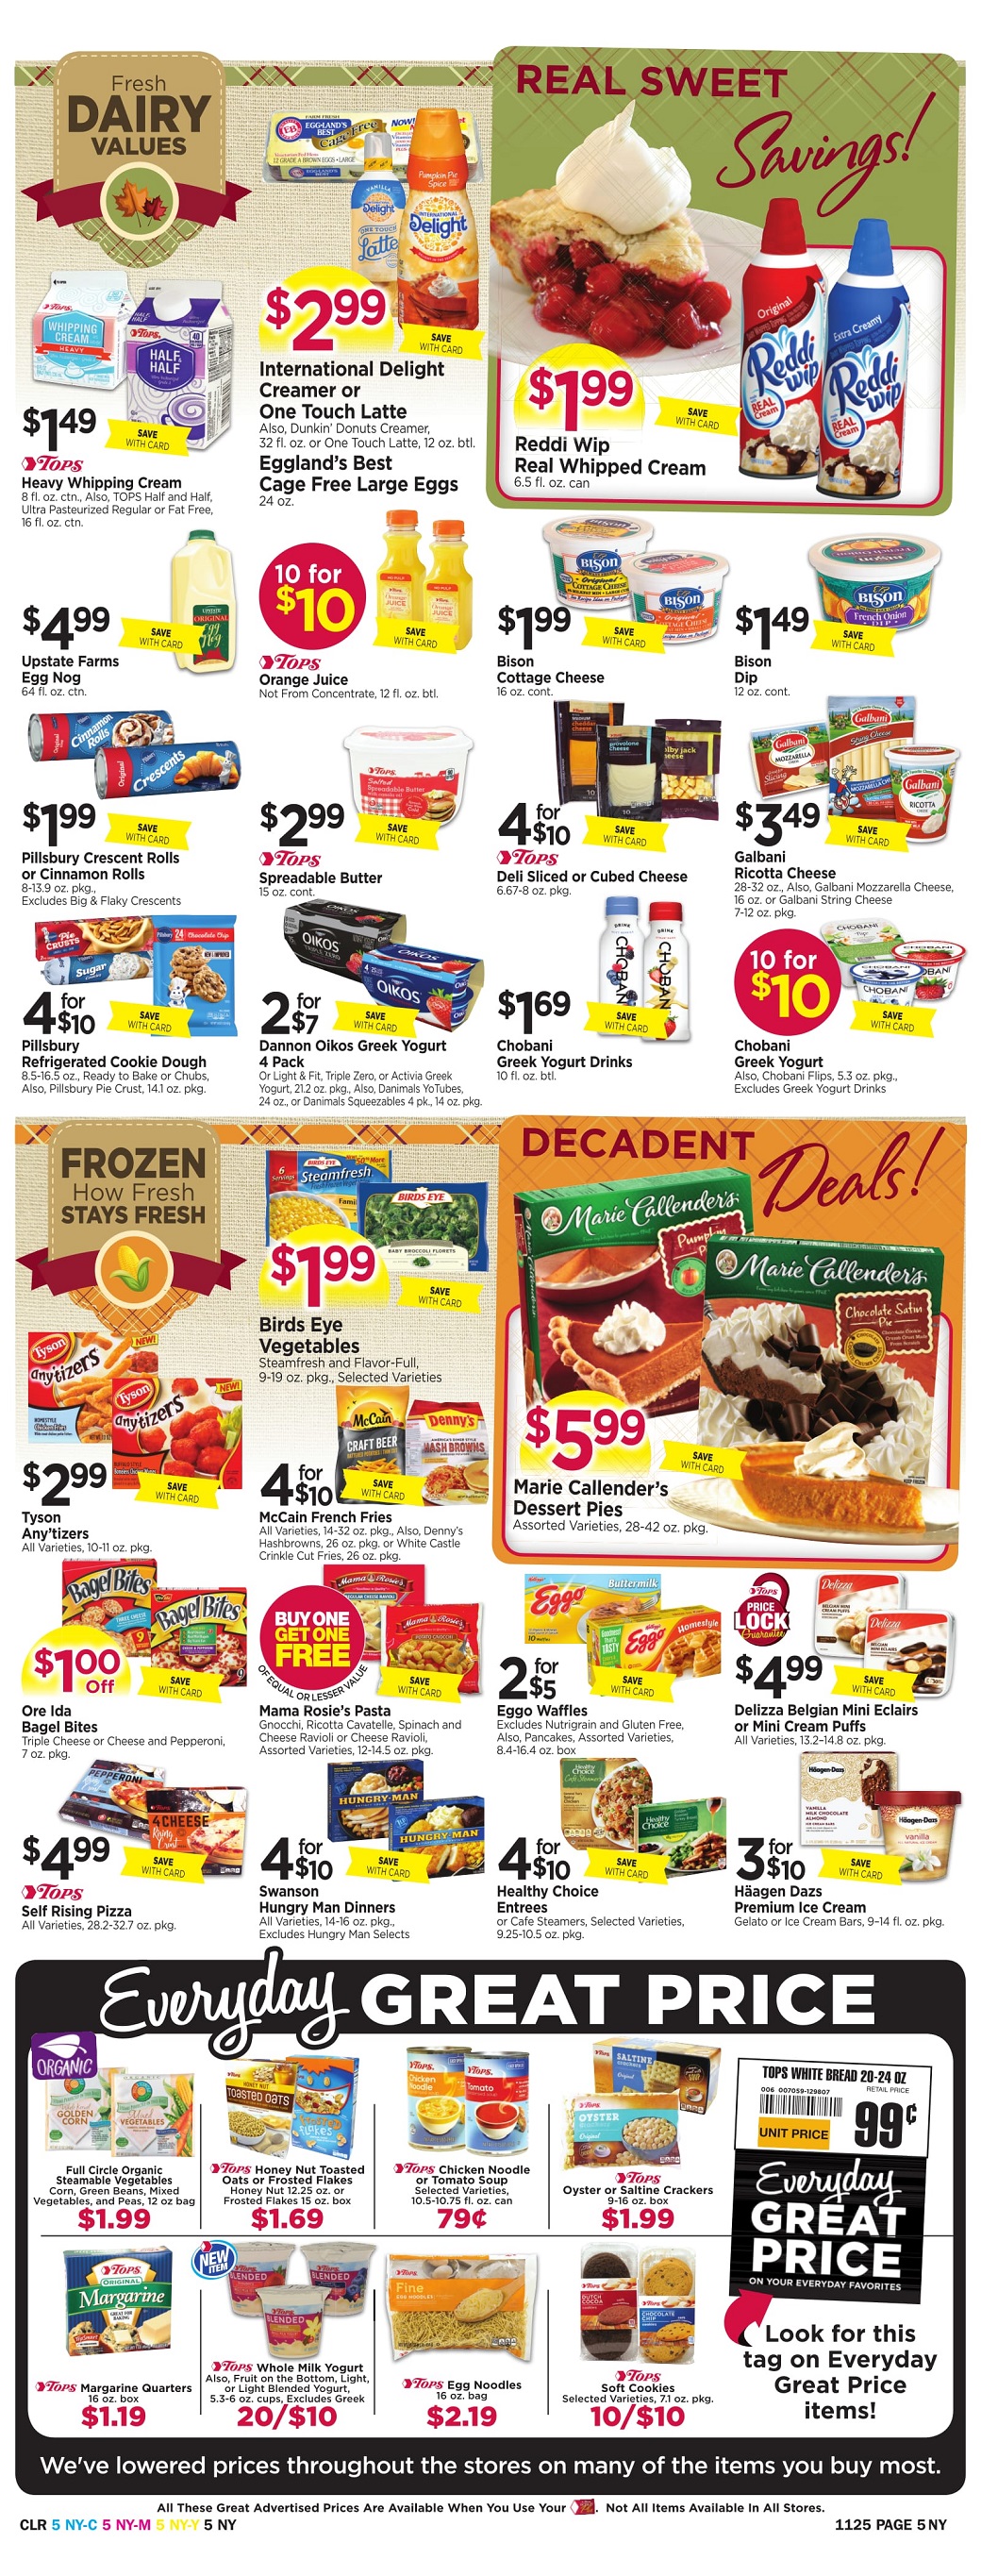 Tops Markets Ad Scan Week 11 19 Page 5